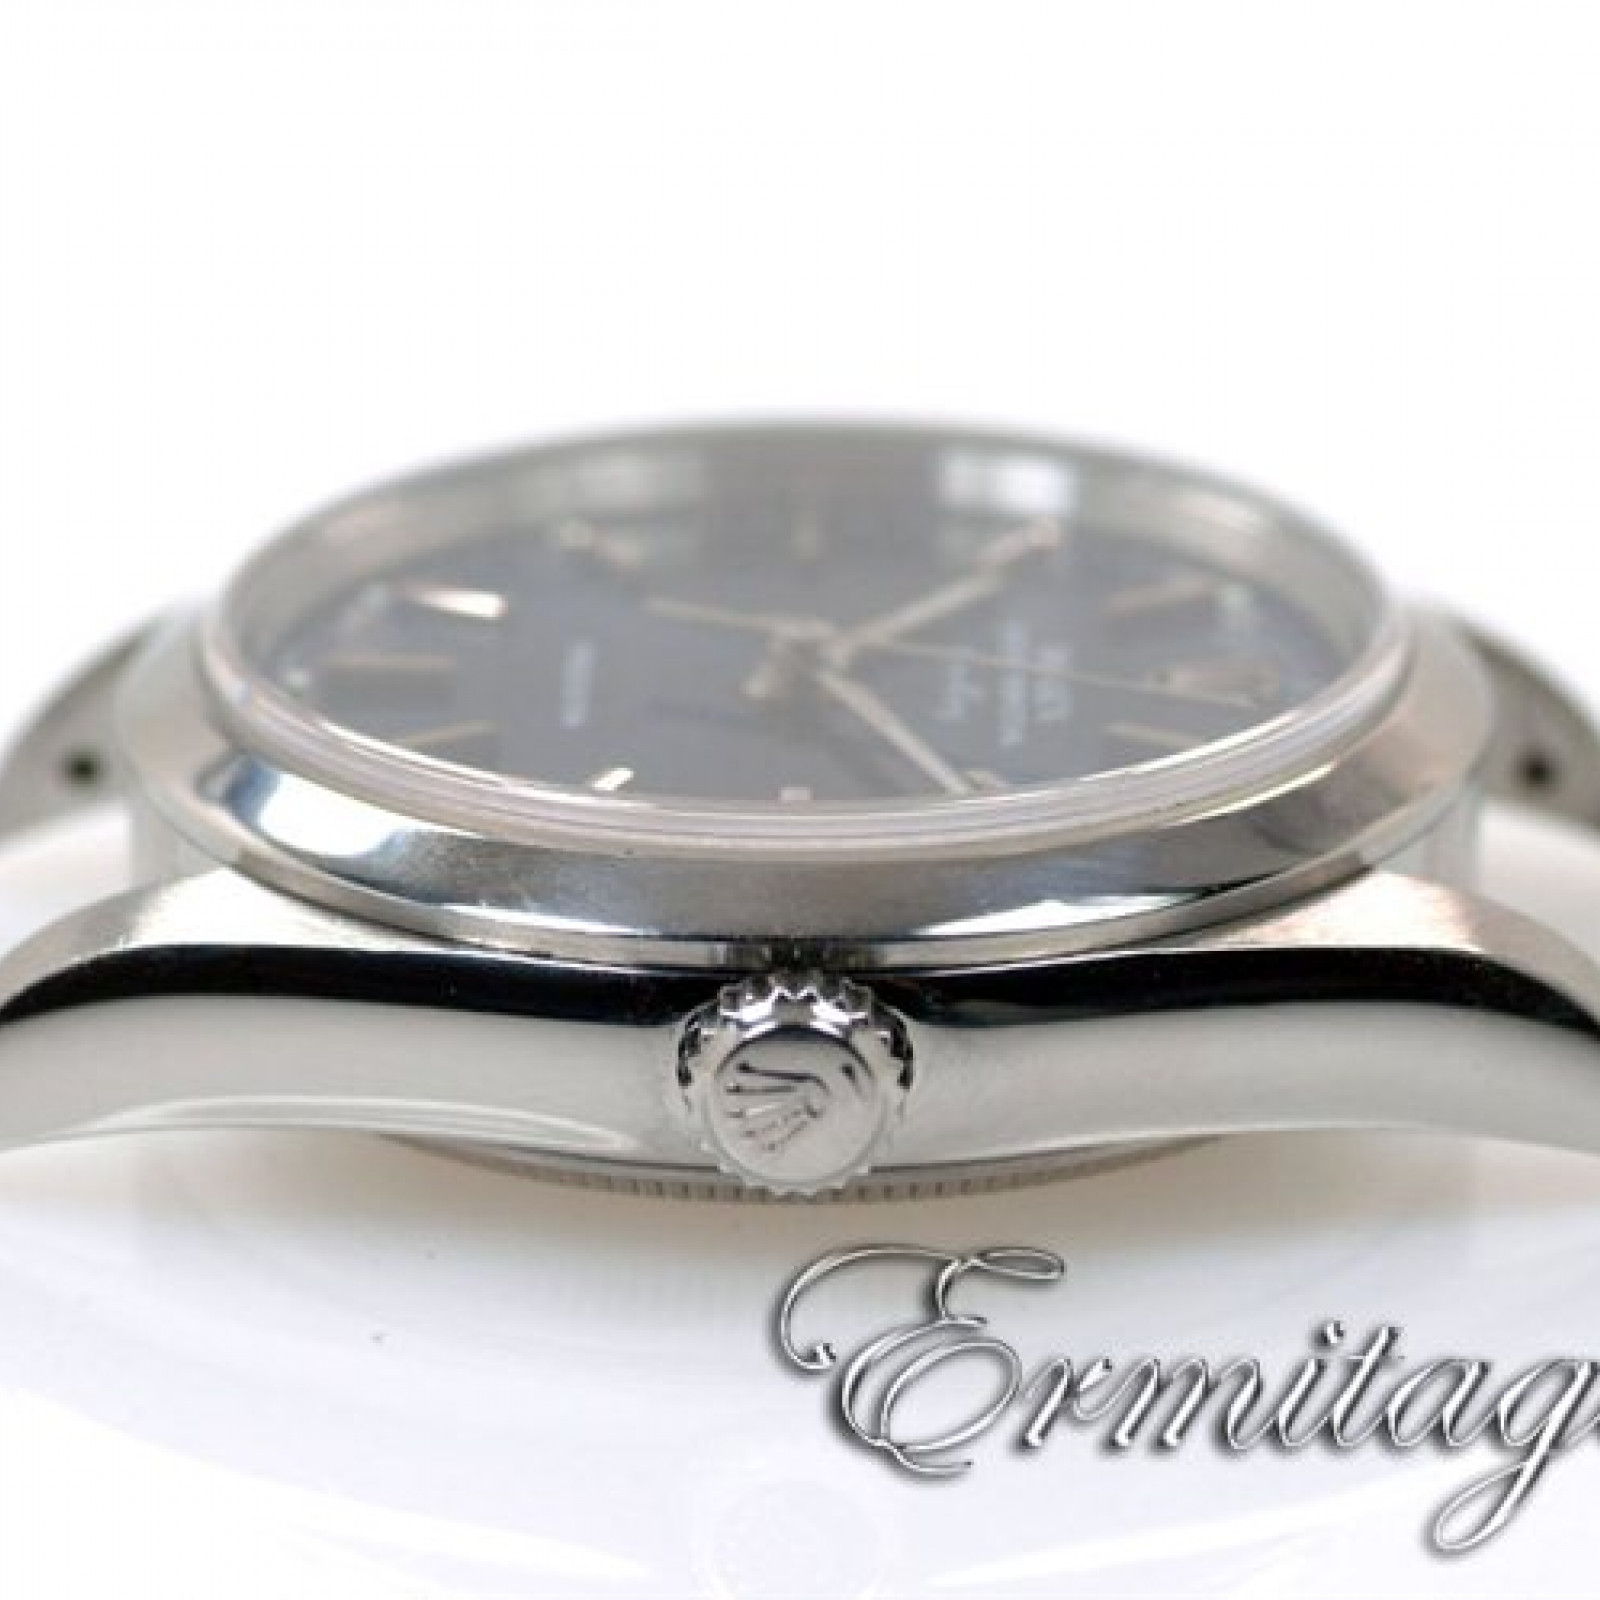 Pre-Owned Rolex Air King 14000 Steel Year 2000